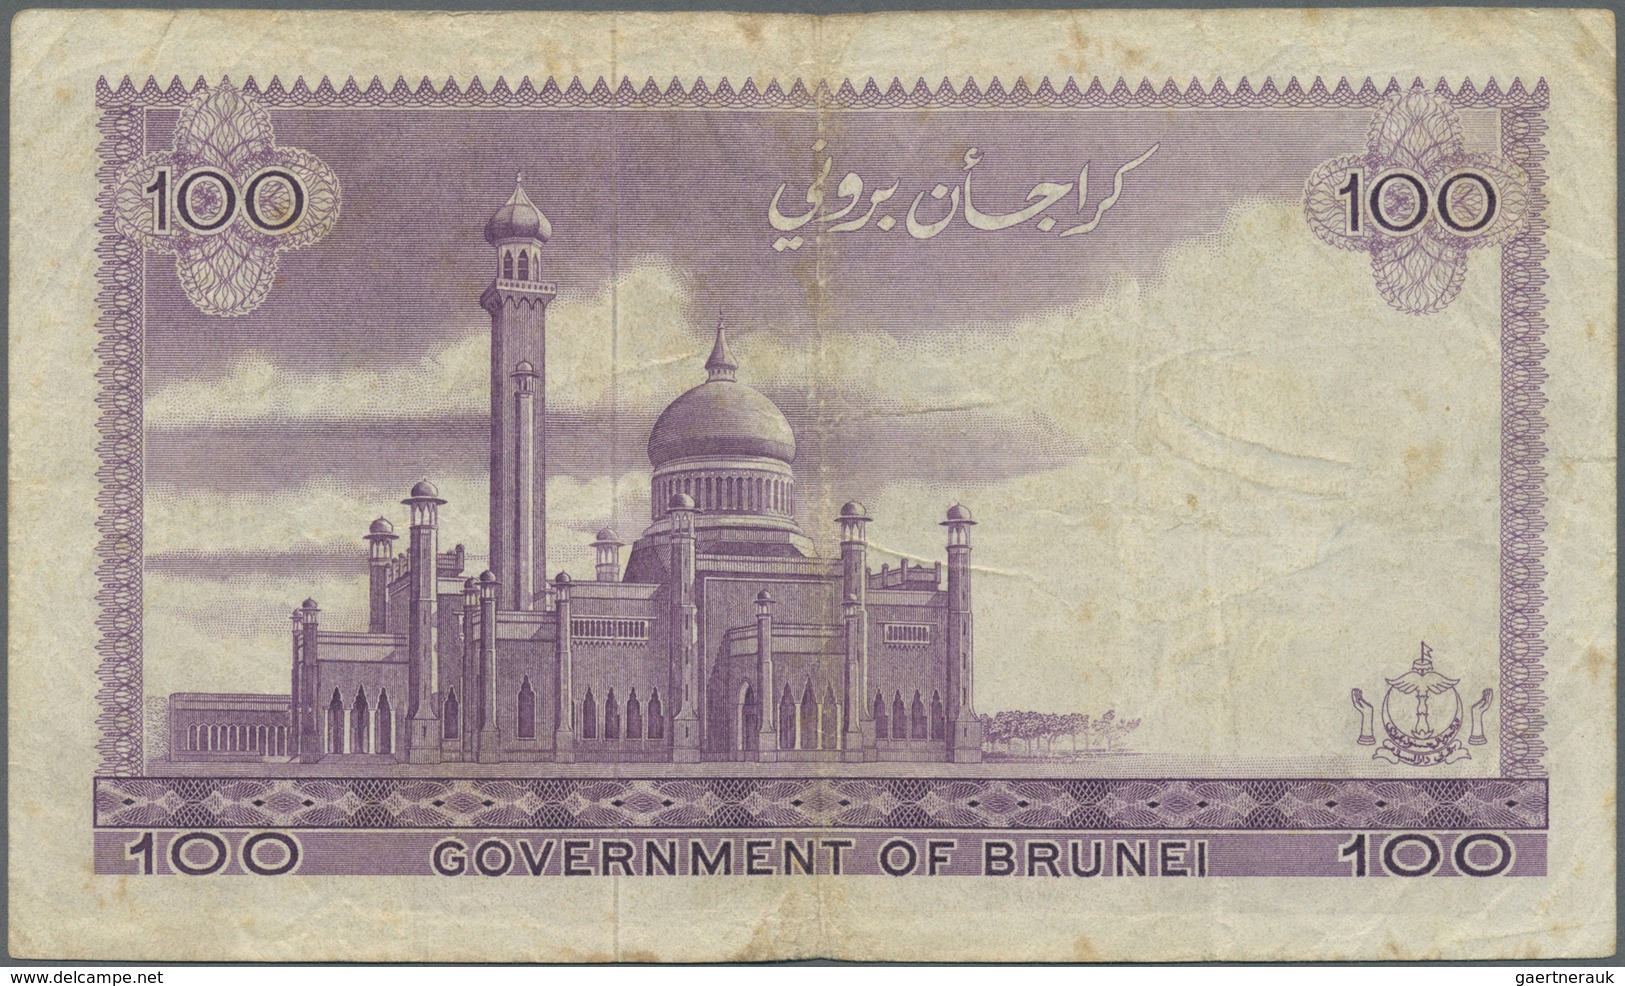 Brunei: 100 Ringgit 1967 P. 5, Used With Several Folds And Creases, Stained Paper, No Holes Or Tears - Brunei